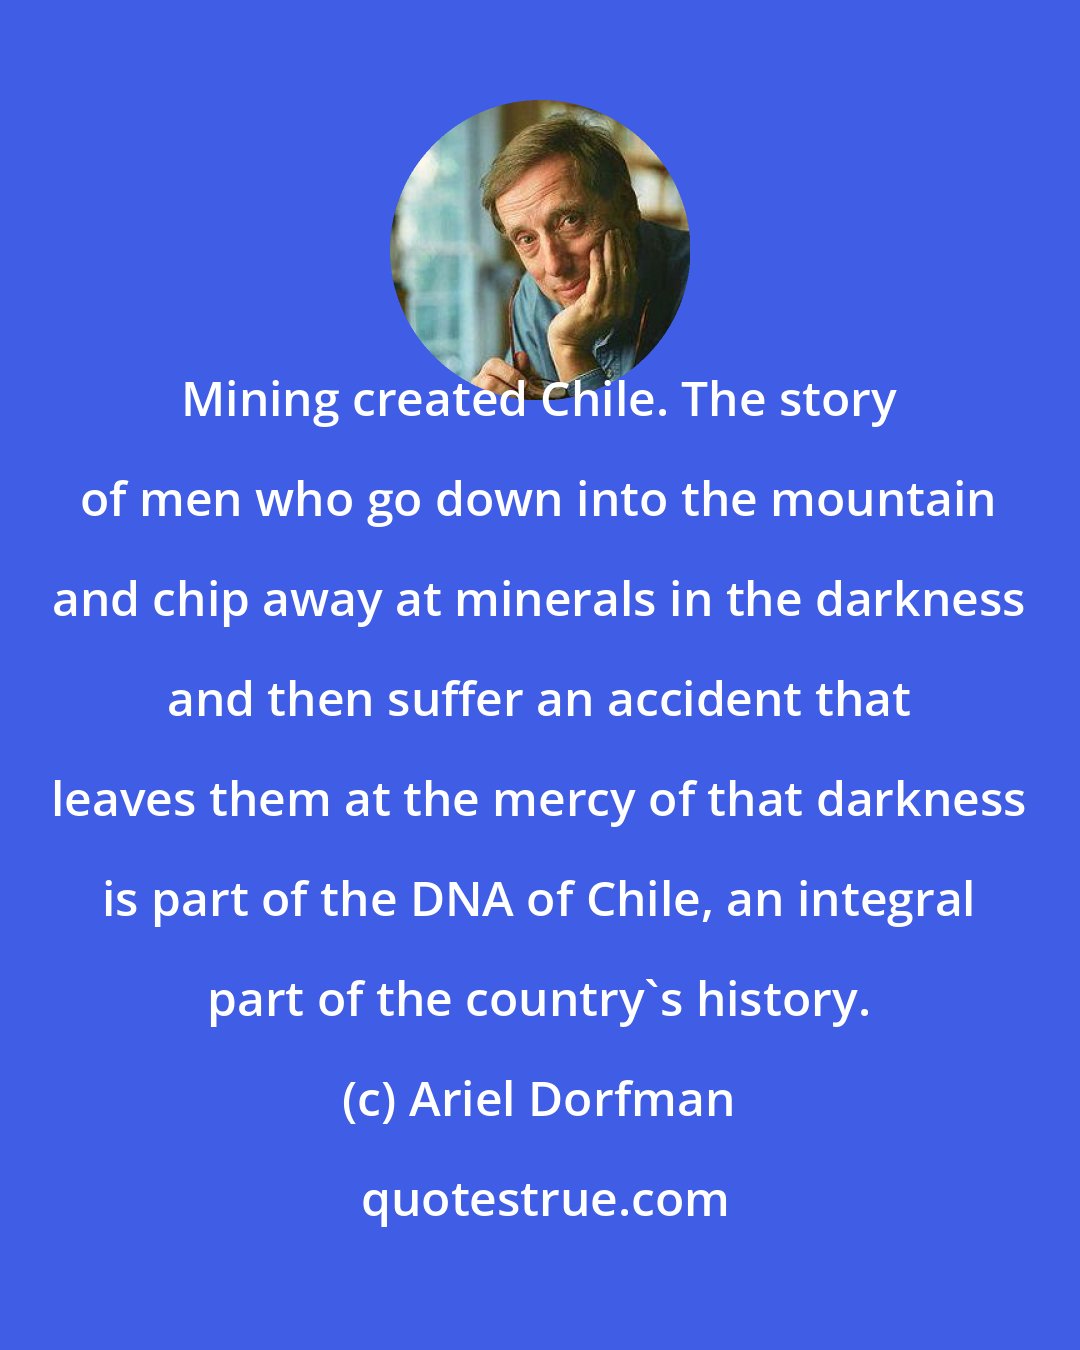 Ariel Dorfman: Mining created Chile. The story of men who go down into the mountain and chip away at minerals in the darkness and then suffer an accident that leaves them at the mercy of that darkness is part of the DNA of Chile, an integral part of the country's history.